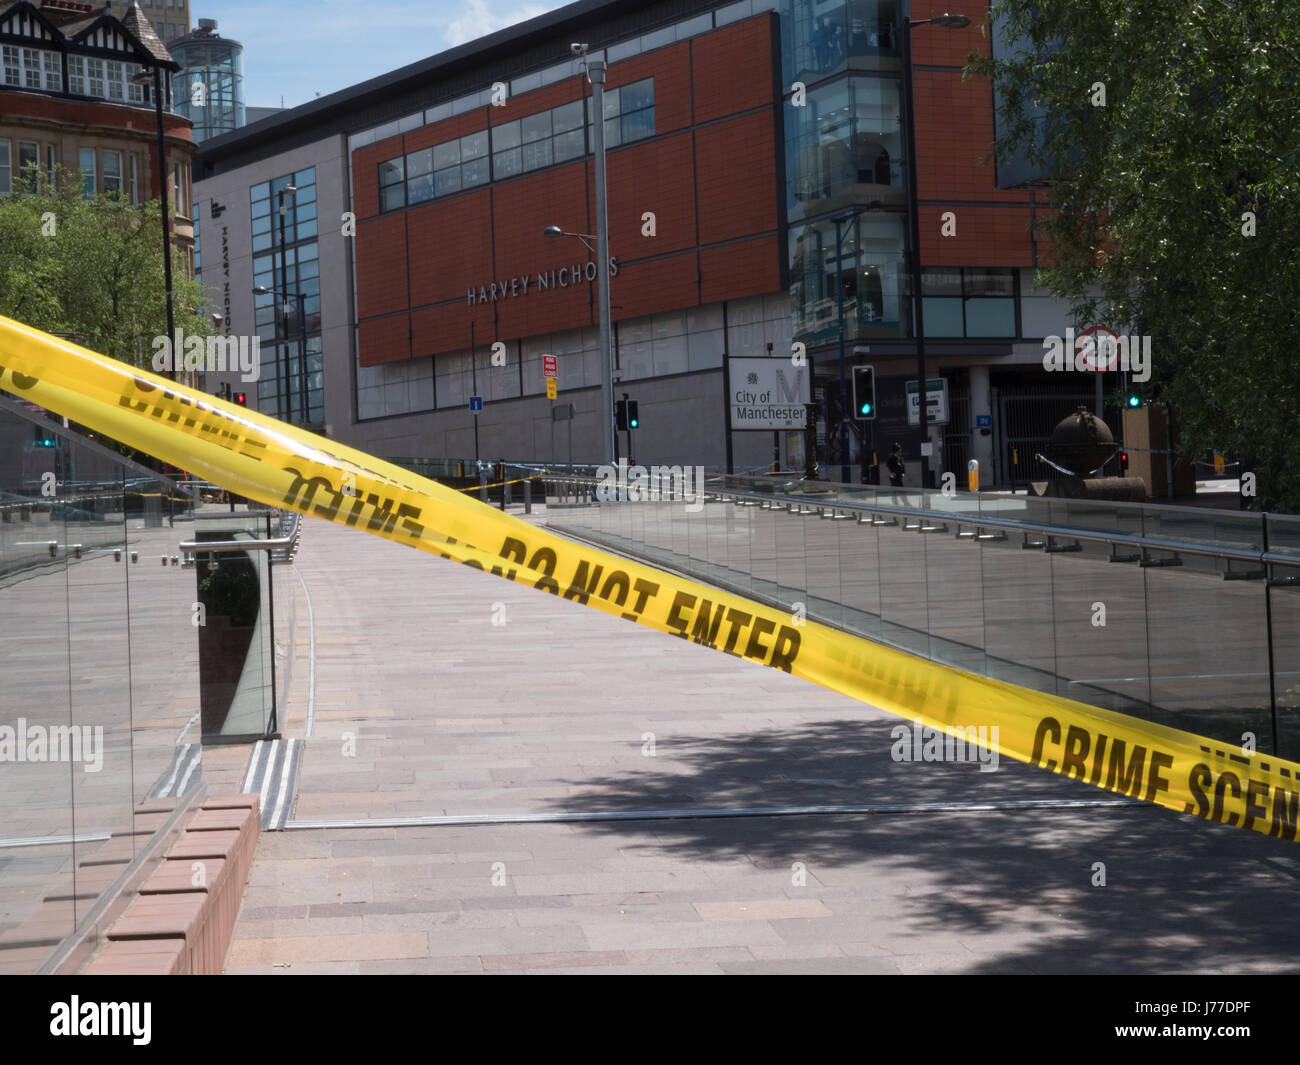 Manchester, UK. 23rd May, 2017. The police crime scene tape used as a cordon near to the Manchester Arena in Manchester city centre (with Harvey Nichols store and a City of Manchester sign visible), the day after a suicide bomb attack killed 22 as crowds were leaving the Ariana Grande concert at the Manchester Arena. Credit: Chris Rogers/Alamy Live News Stock Photo